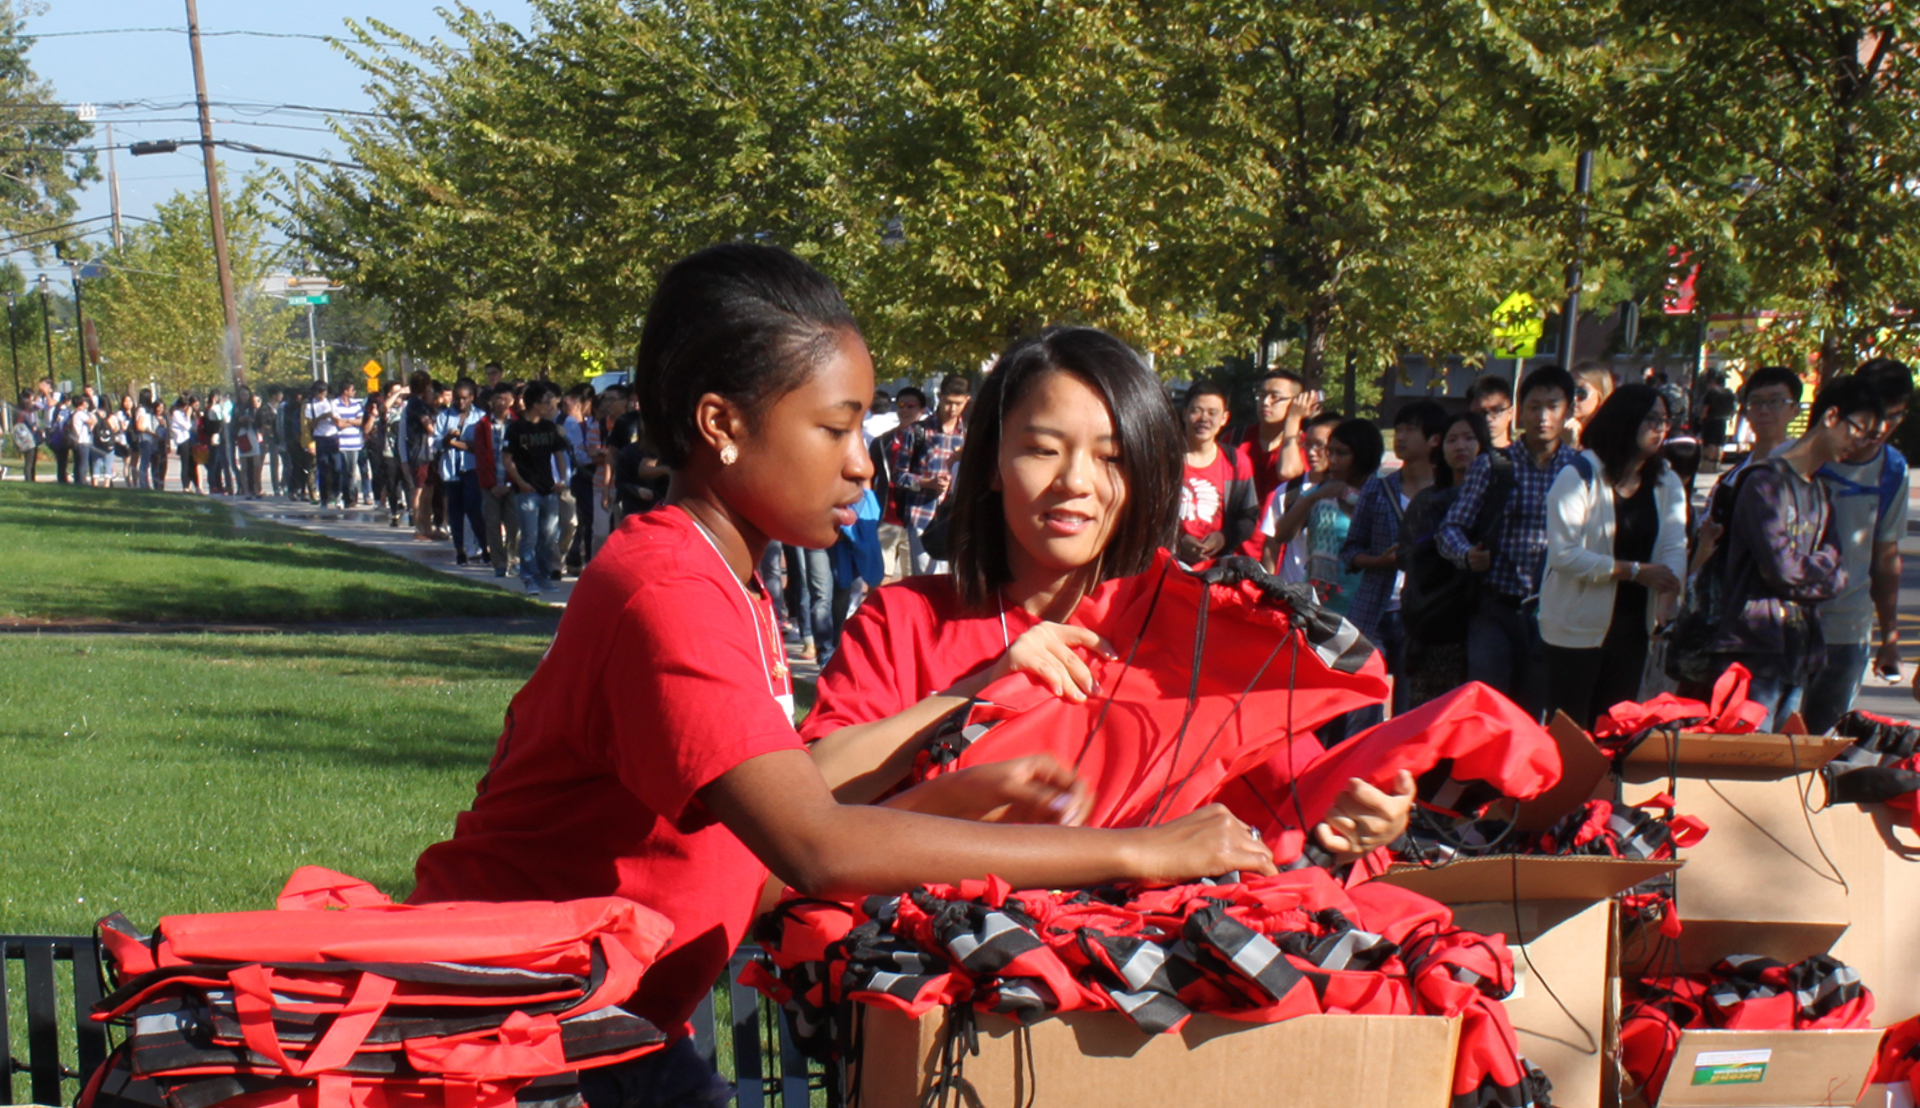 Rutgers Global – International Student Orientation, a long line of international students arrives on campus for orientation and receives a special Rutgers tote bag upon entry